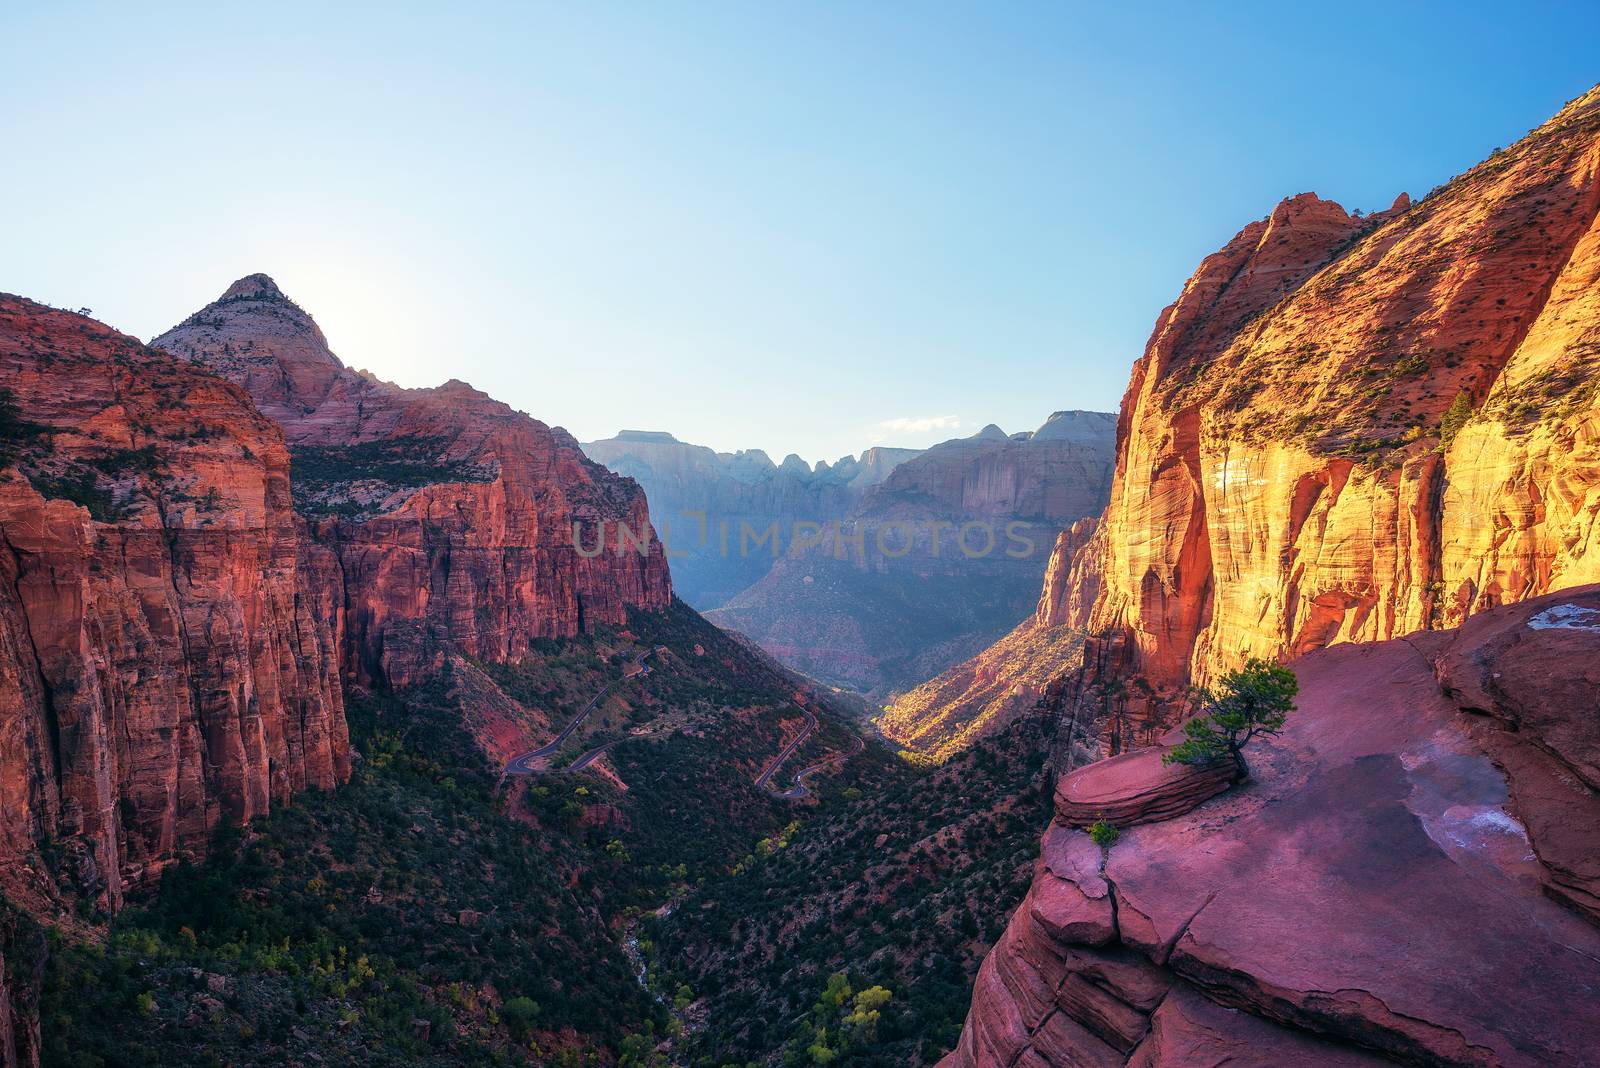 Canyon Overlook at Zion National Park, Utah by nickfox